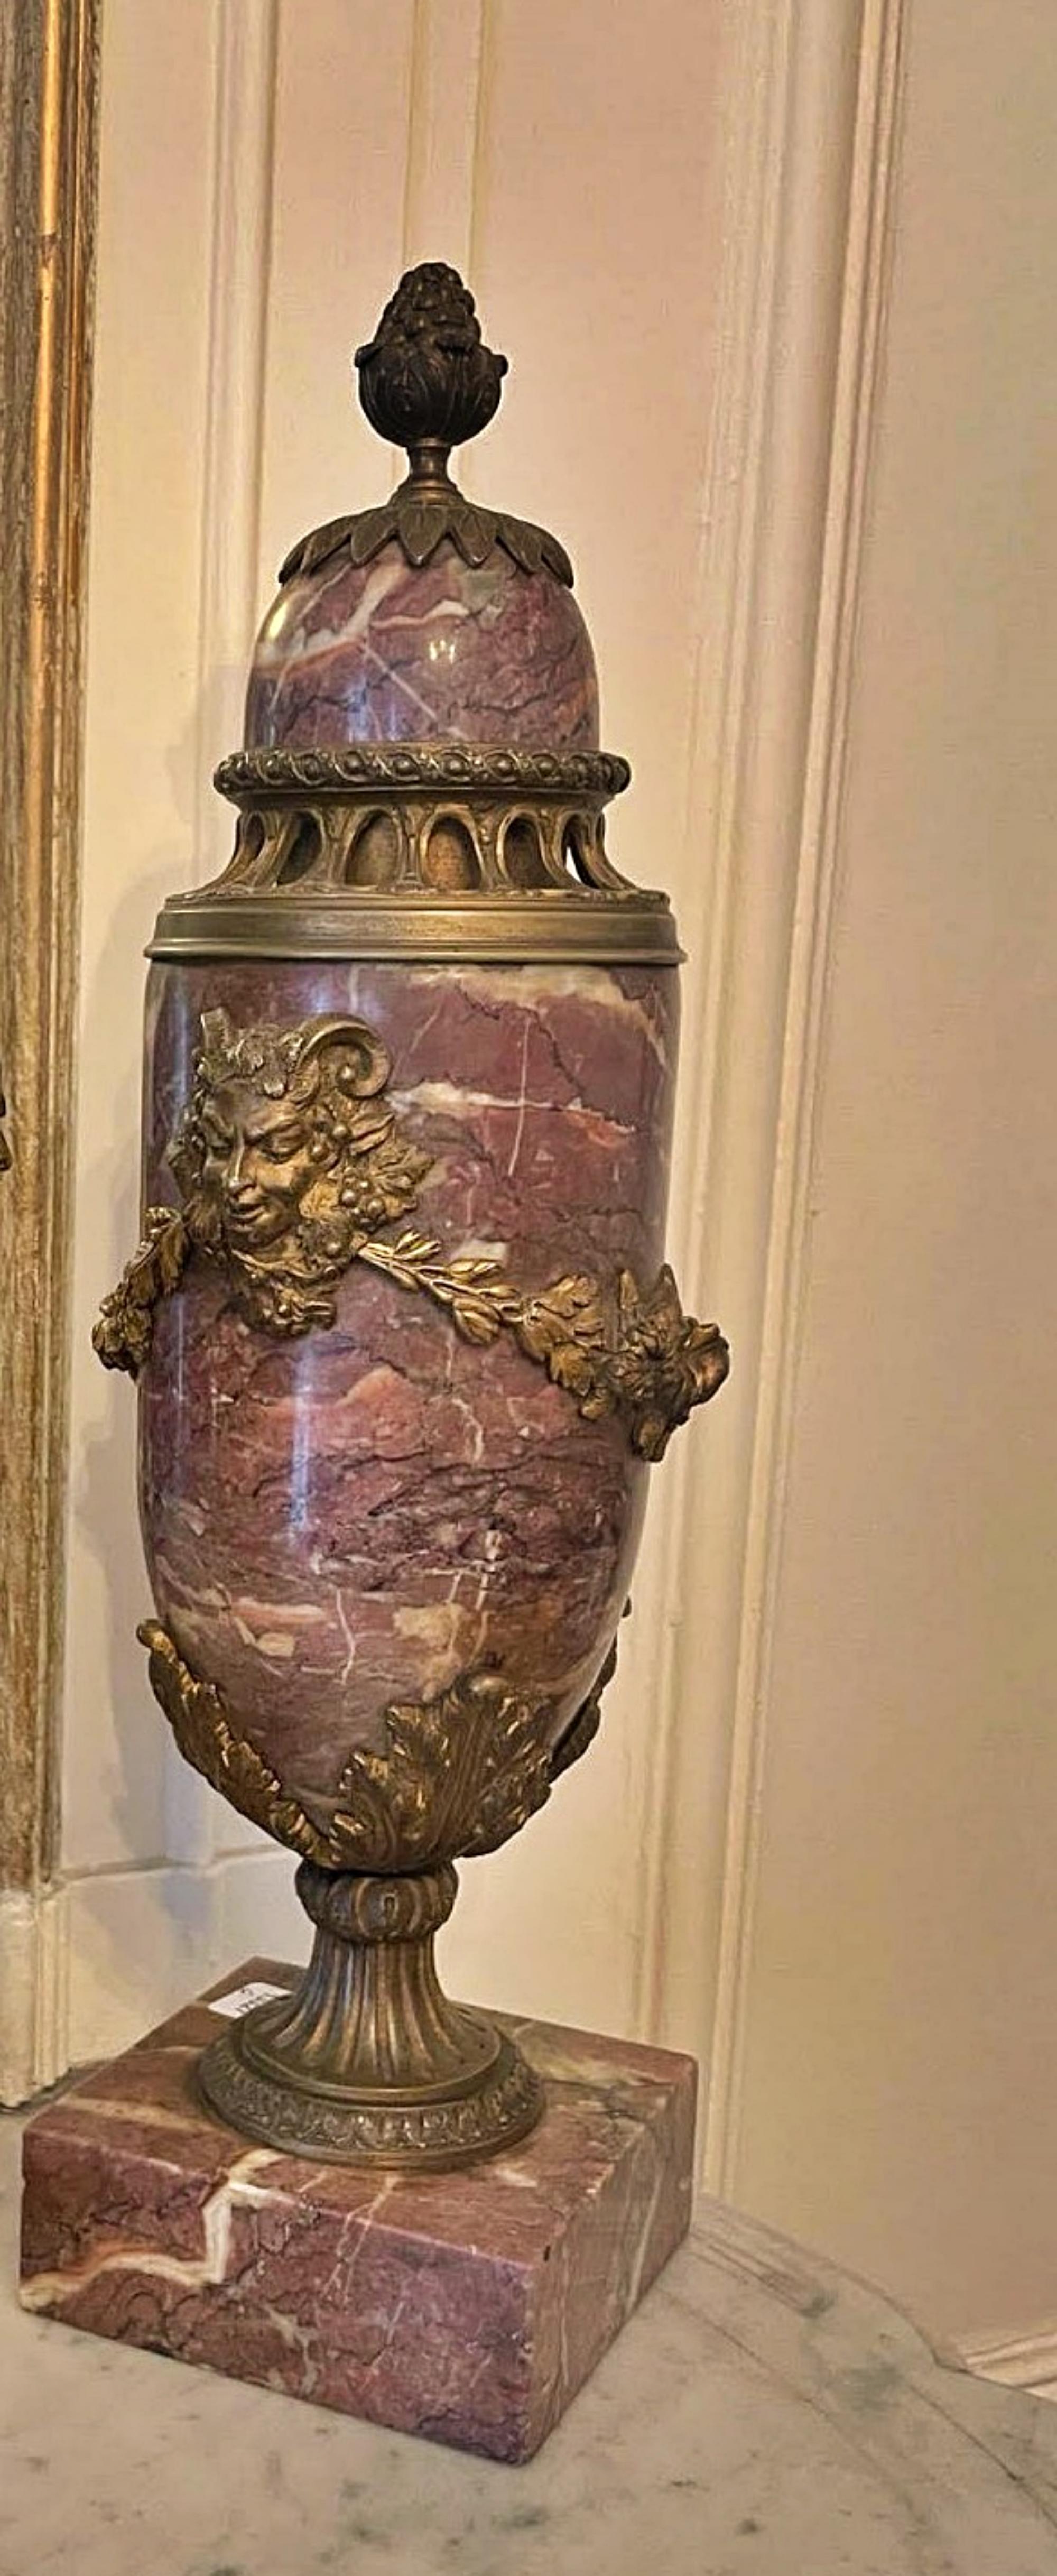 Important Pair of Gilt Bronze covered Perfume Burner Vases 19th century
France
with flower garlands and cherry marble. 
Louis XVI style, 
circa 1880. 
Height: 43 cm.
very good condition.